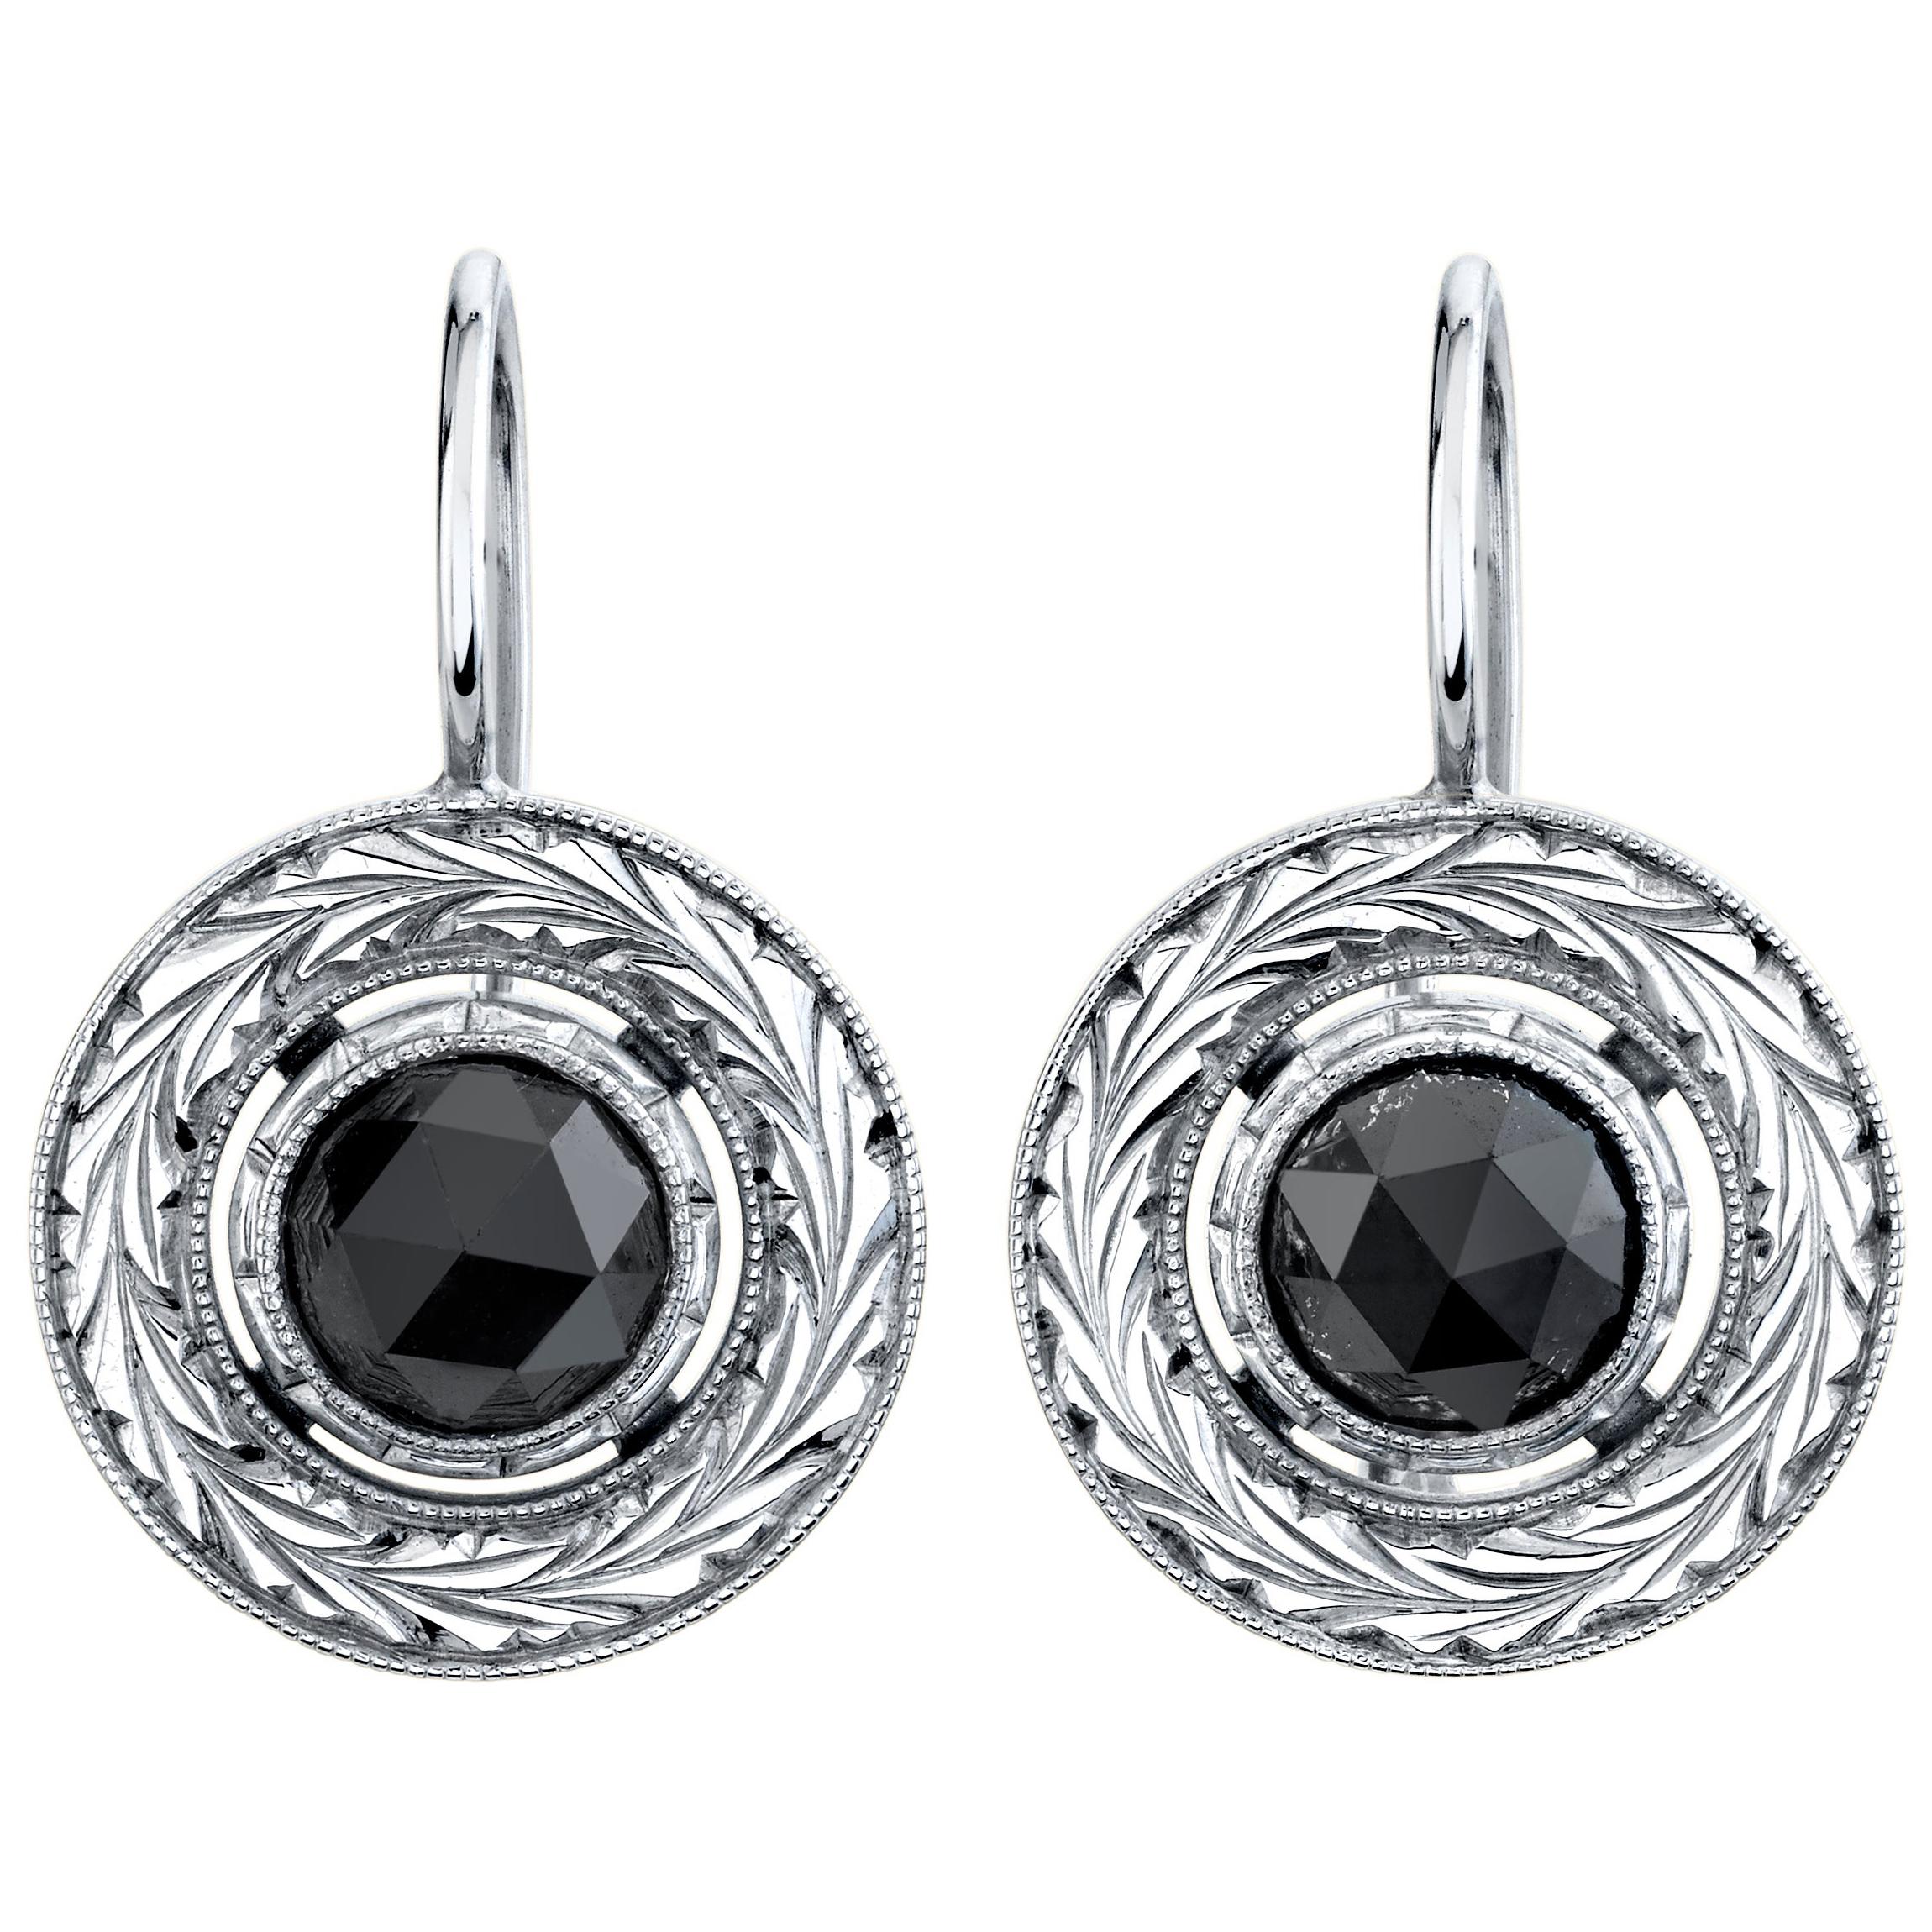 Rose Cut Black Diamond Engraved Drop Earrings in White Gold, 2.42 Carats Total